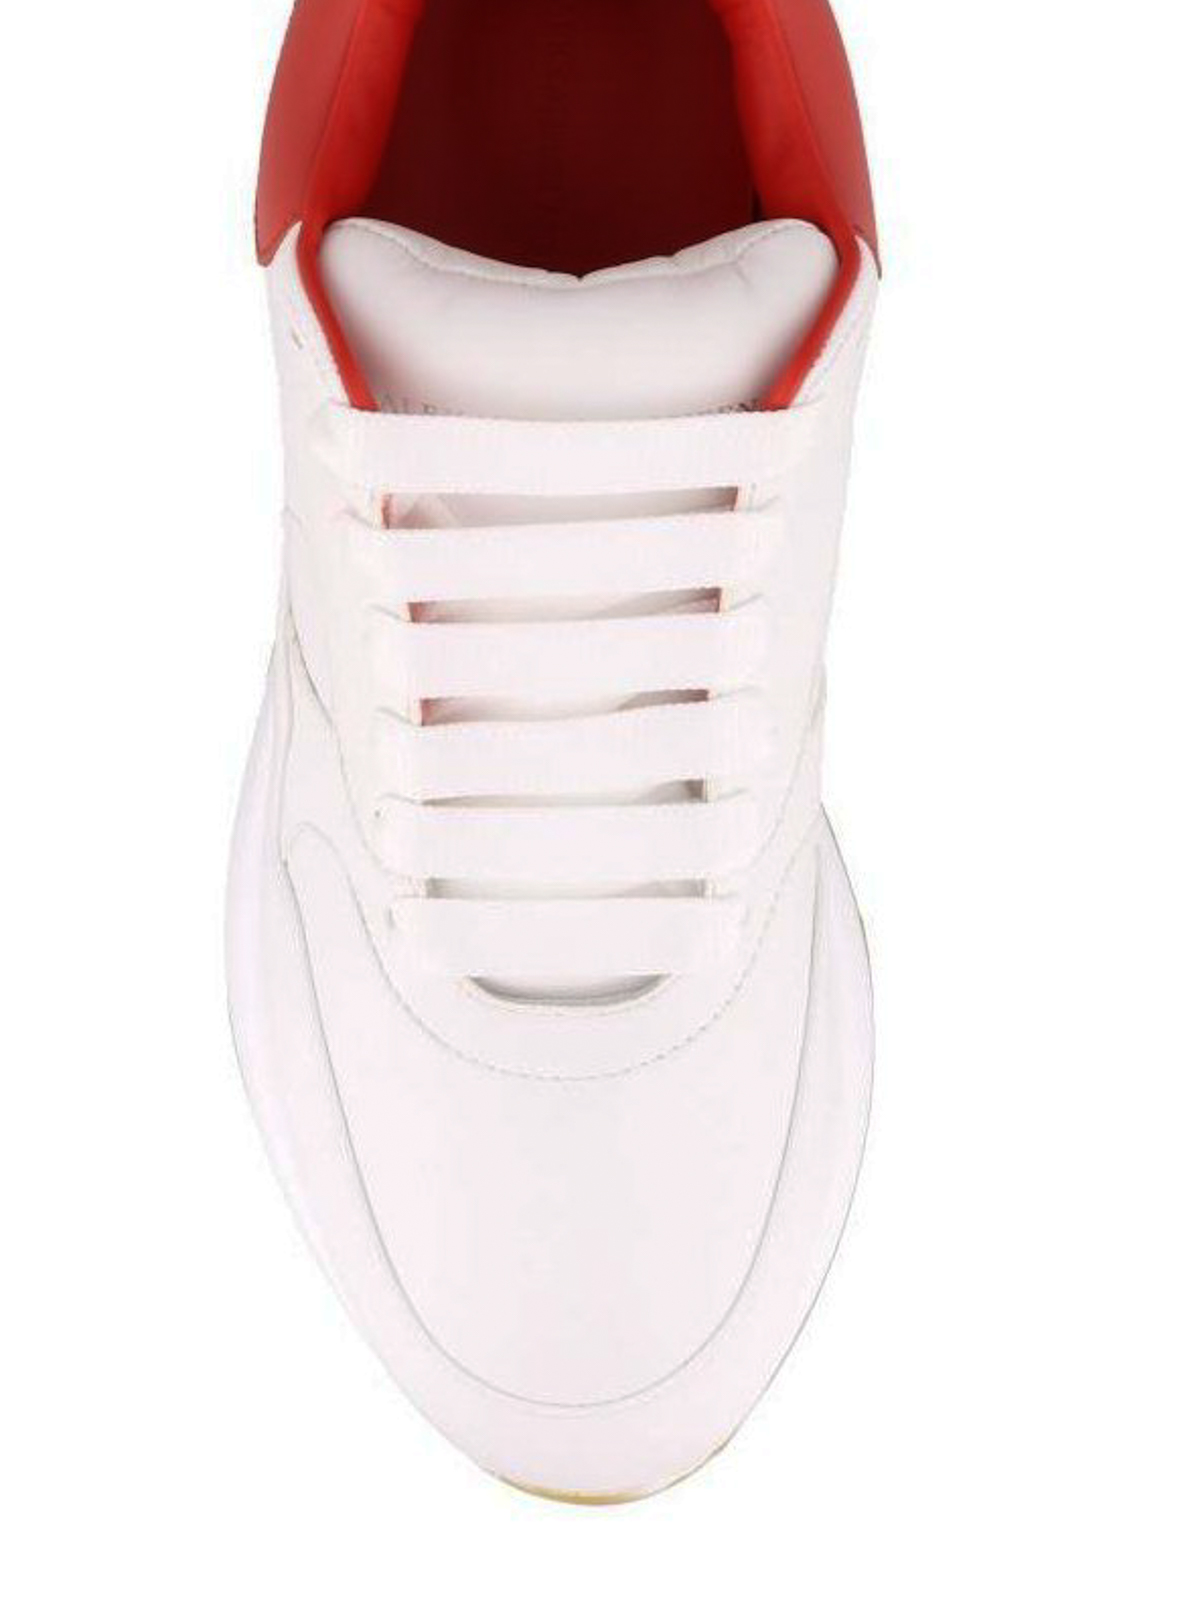 alexander mcqueen trainers white and red